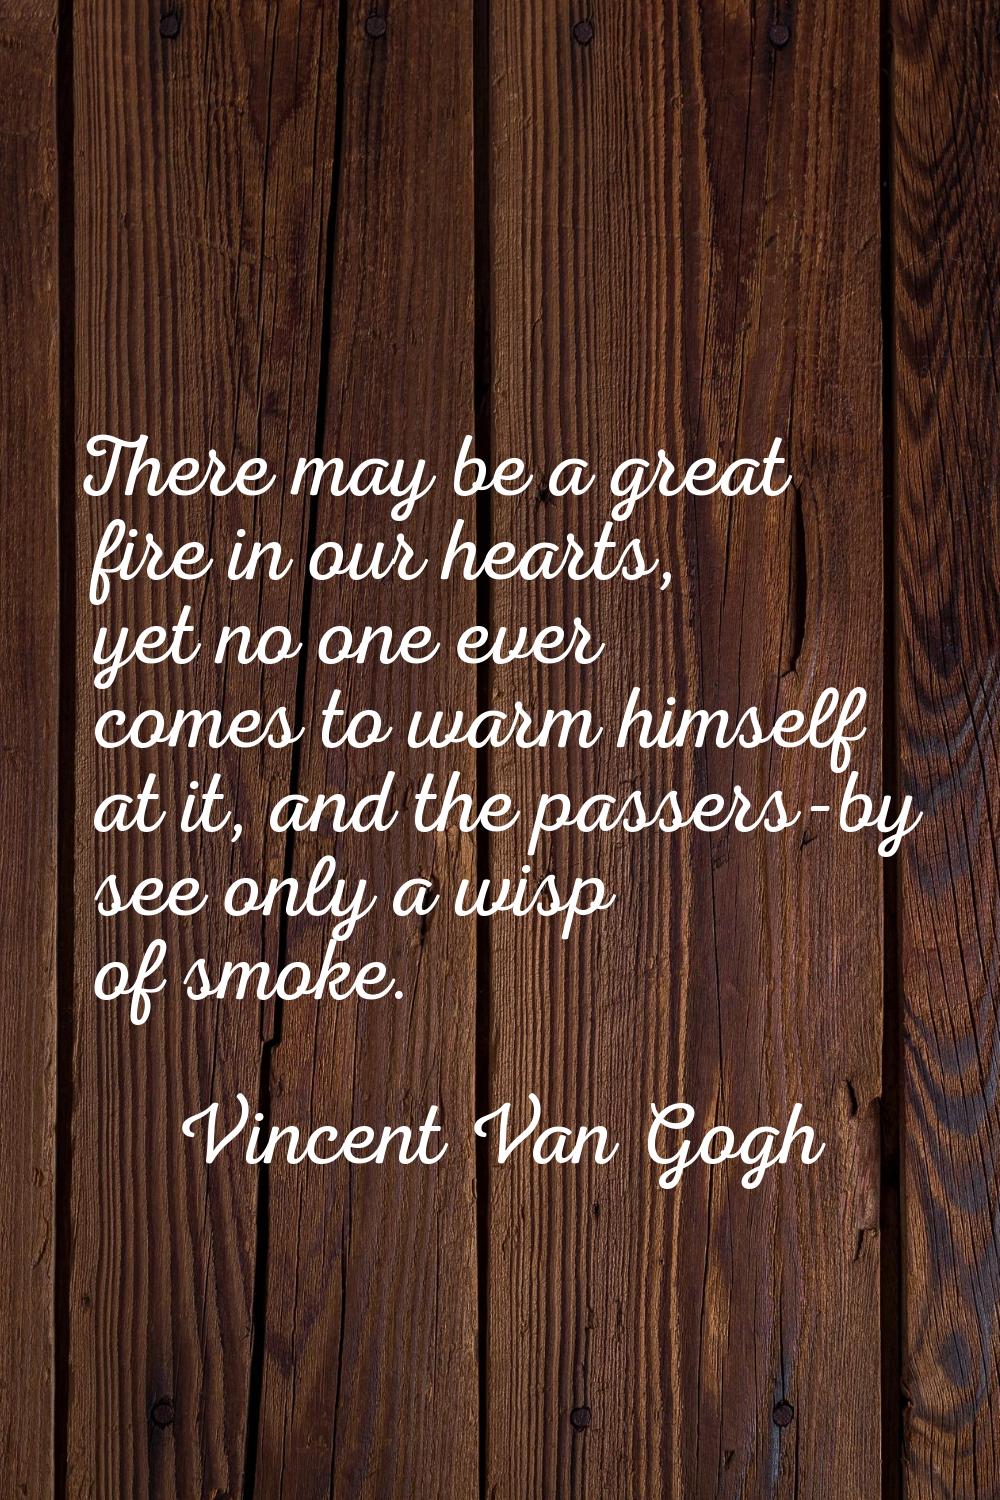 There may be a great fire in our hearts, yet no one ever comes to warm himself at it, and the passe